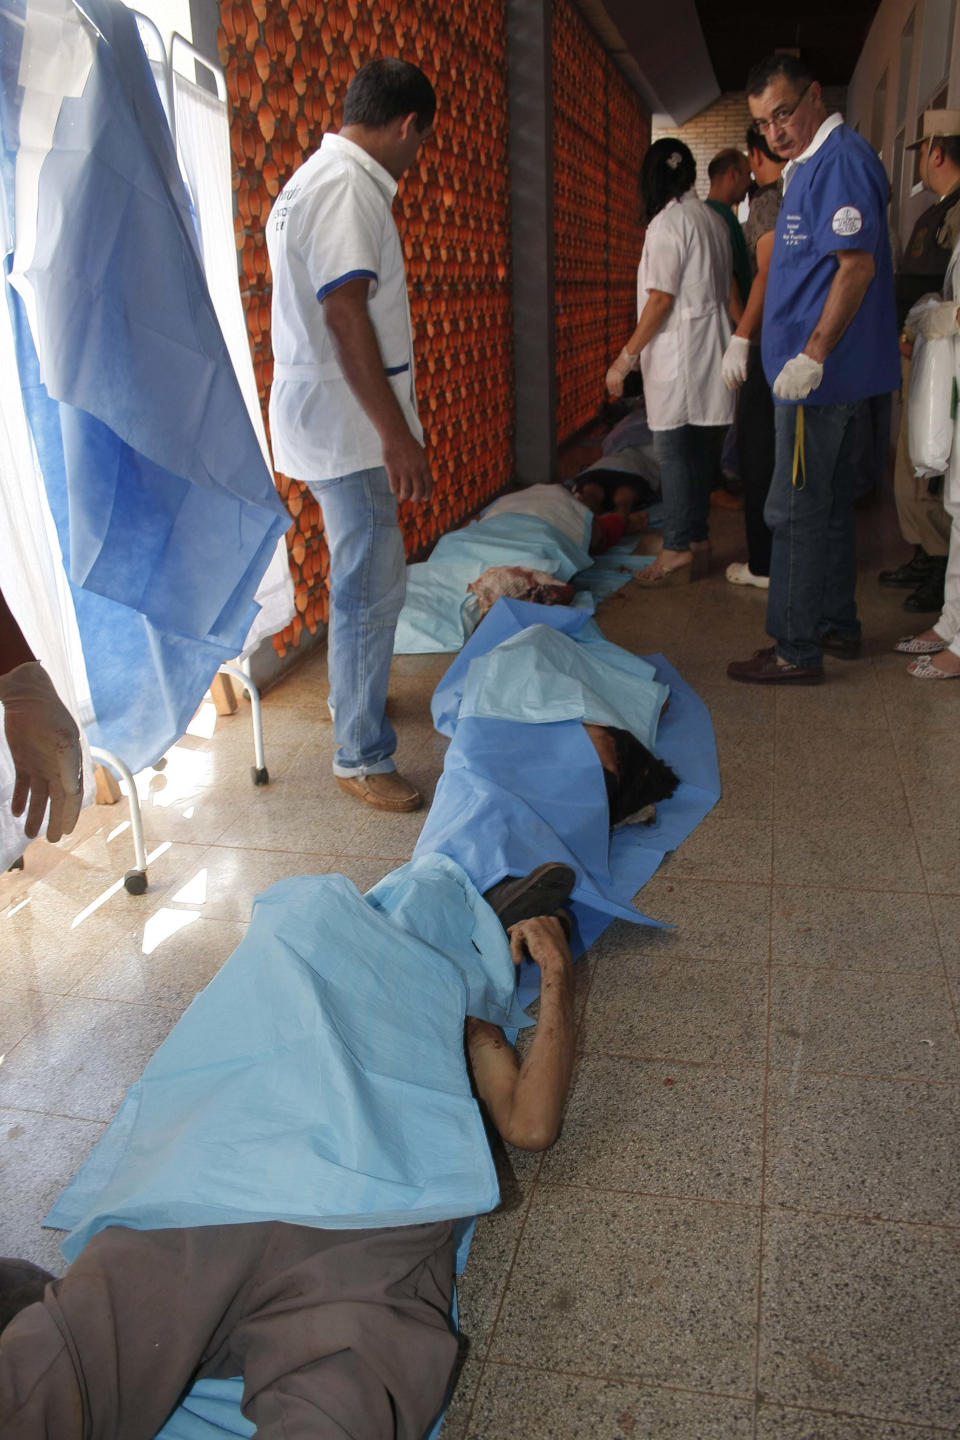 The bodies of farmers killed by police during a land eviction, lie covered on a hospital floor in Curuguaty, Paraguay, Friday, June 15, 2012. Paraguay deployed its army on Friday to resolve the violent land dispute in Curuguaty, a remote northern forest reserve, where 17 people have been killed in gun battles between police and landless farmers when police were trying to evict about 150 farmers from the reserve, which is part of a huge estate owned by a Colorado Party politician opposed to leftist President Fernando Lugo. (AP Photo)